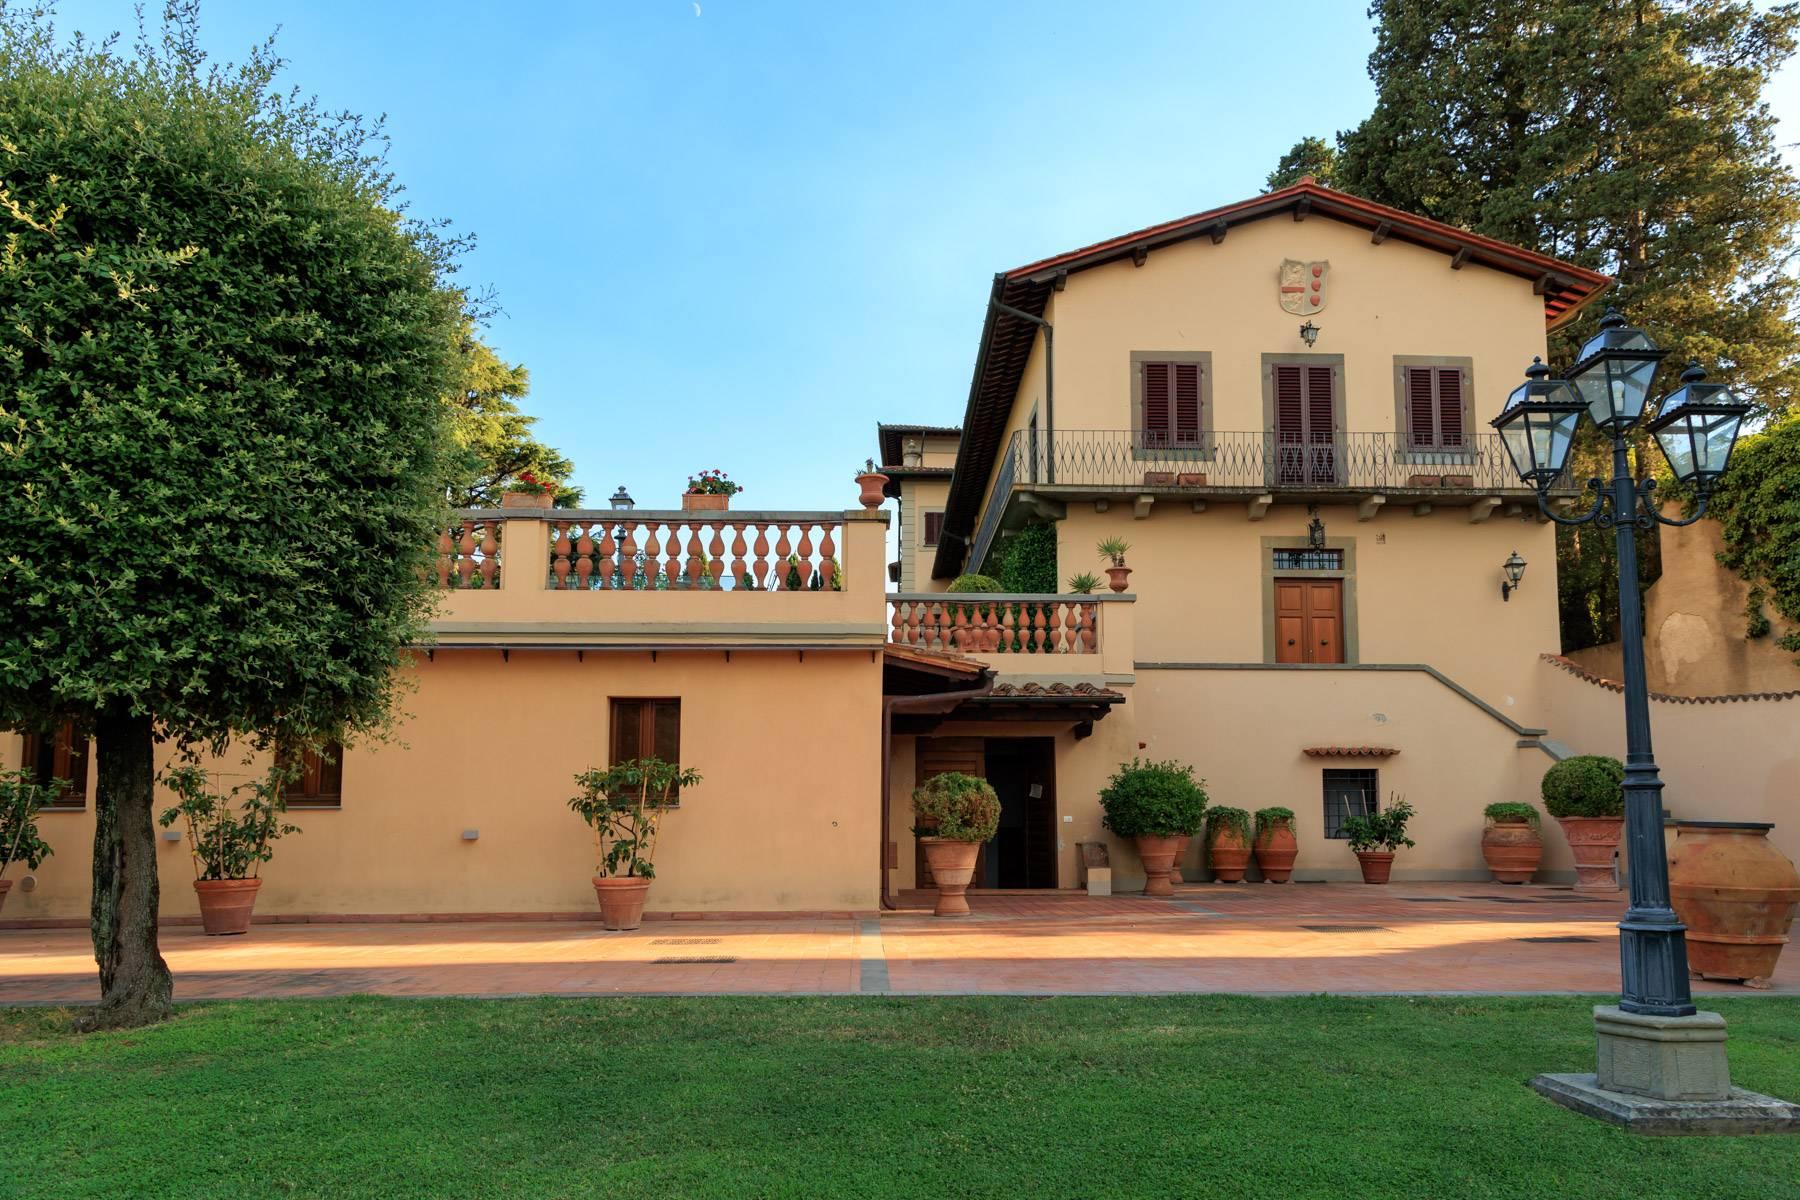 Apartment in a historical villa on the hills of Carmignano - 23